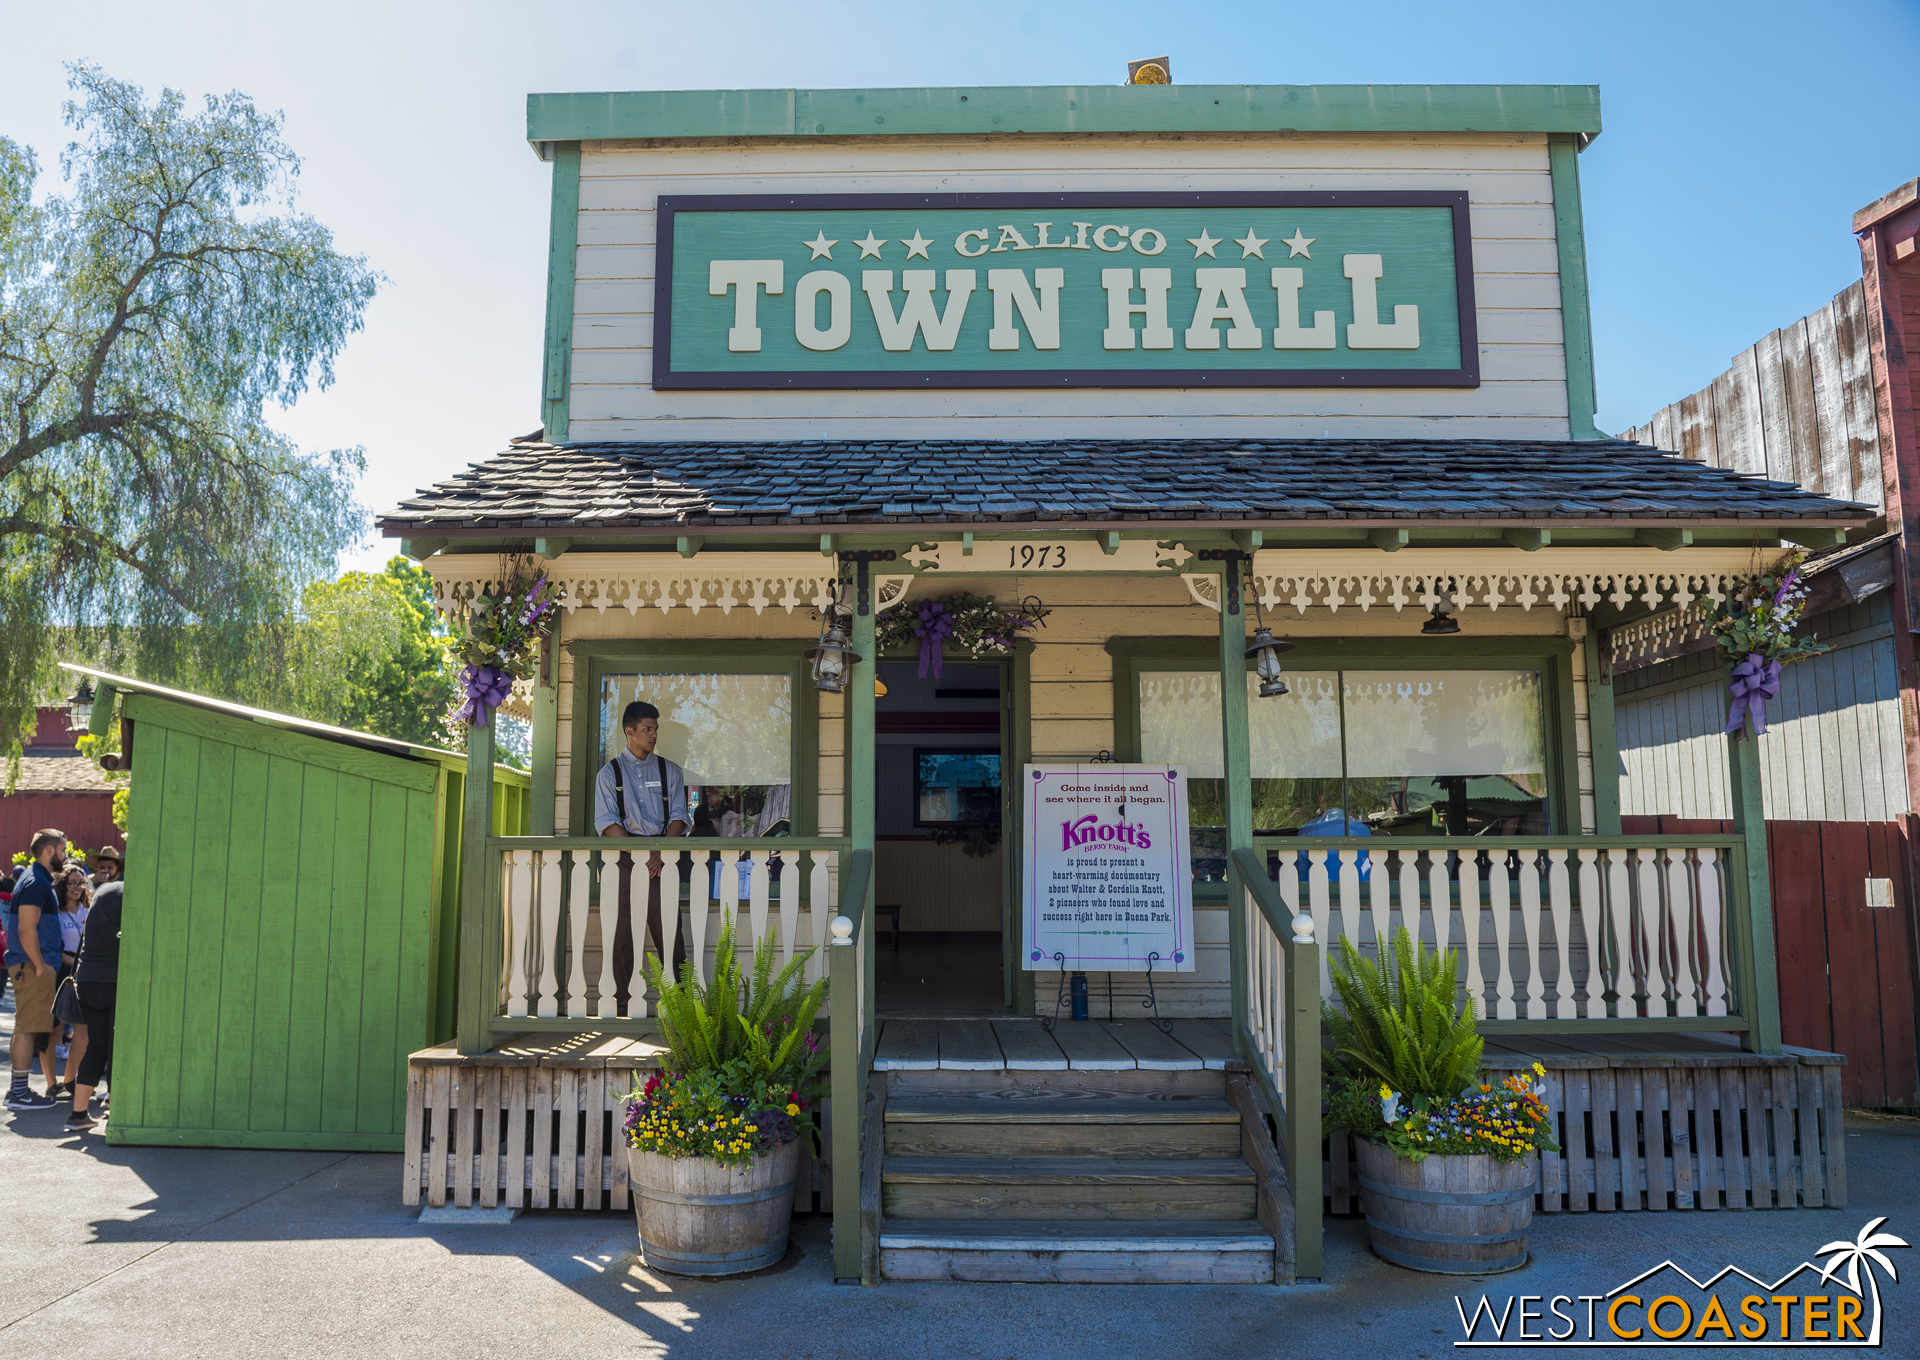  The History of the Boysenberry Presentation plays all day at the Calico Town Hall. 